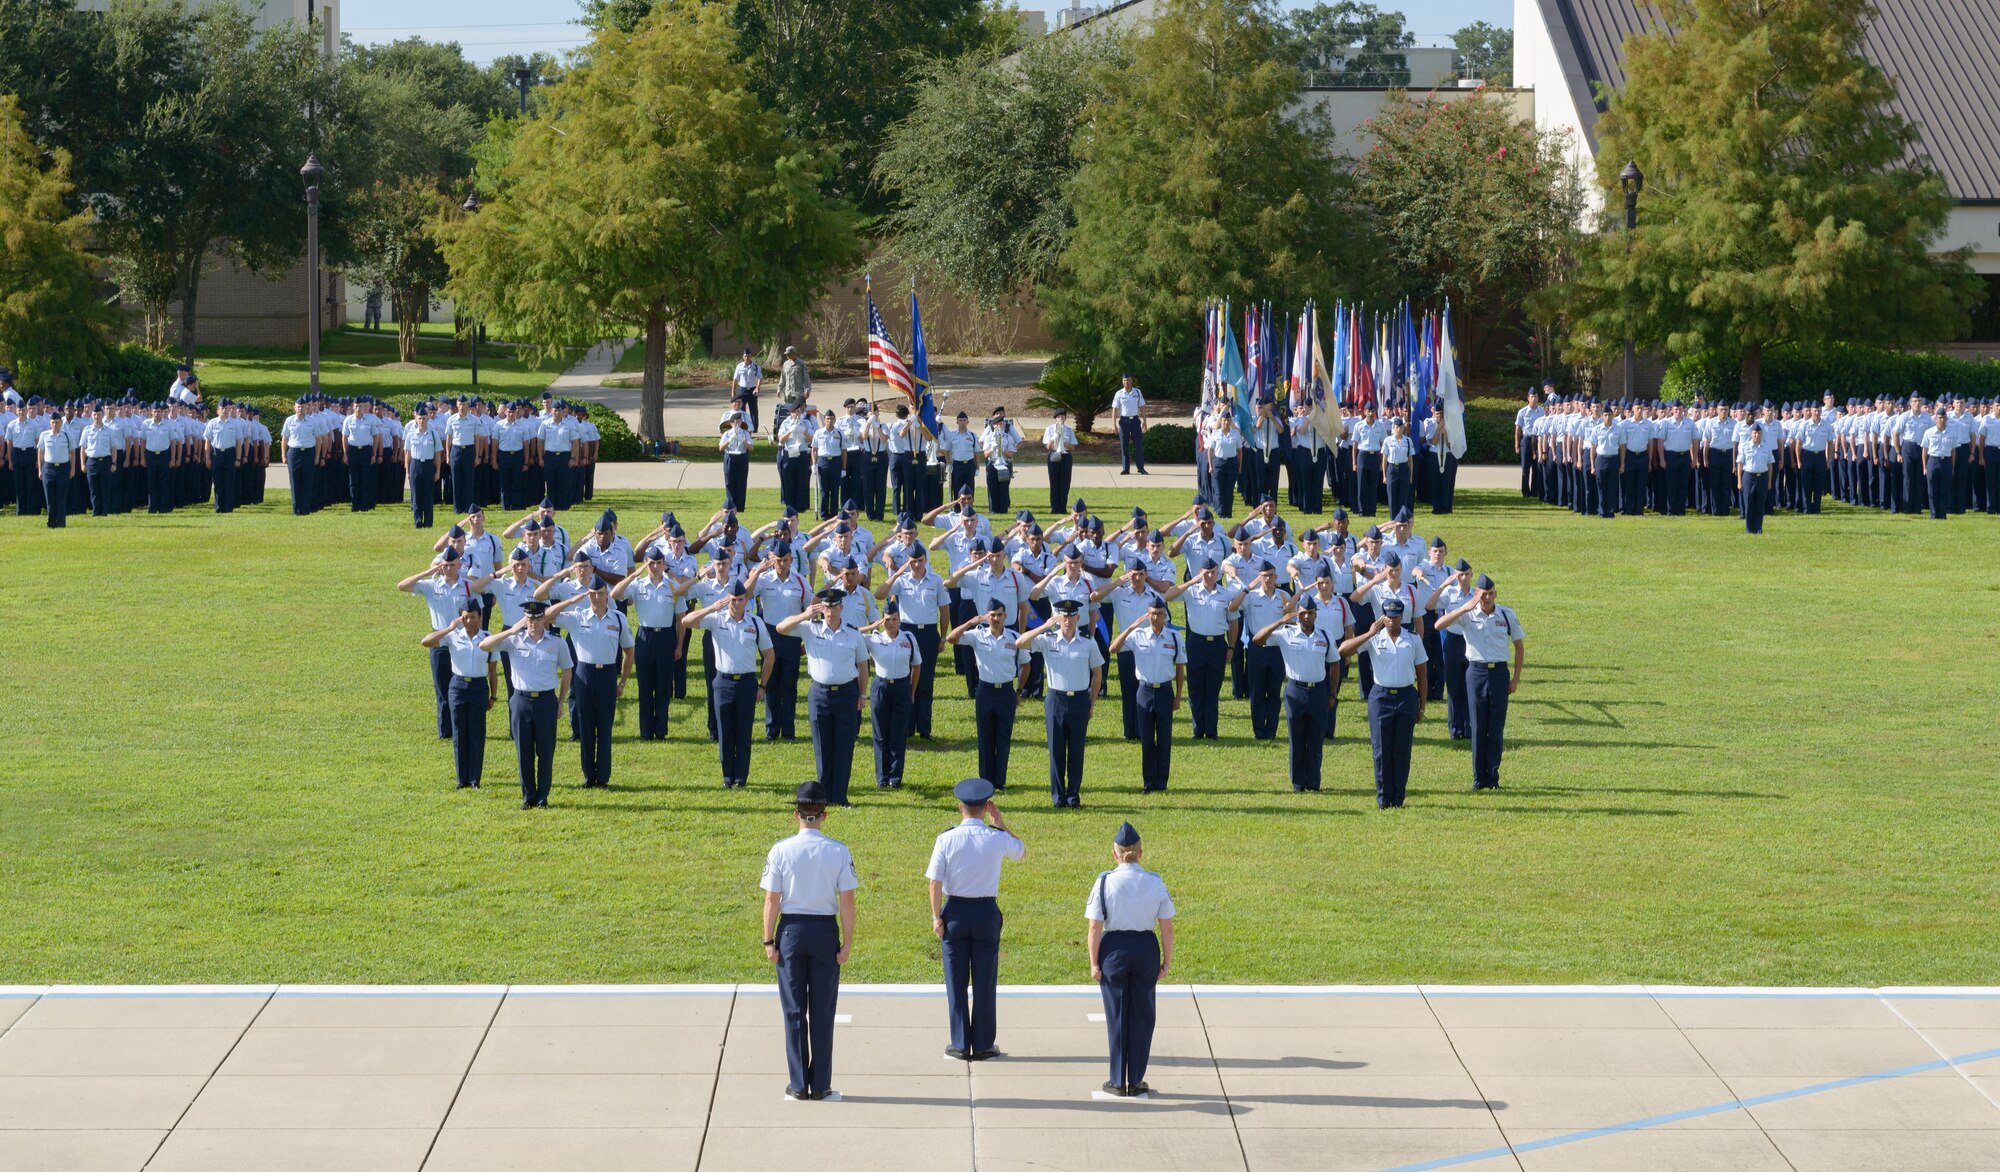 Parade group officers salute the commander of troops during the 2nd Air Force change of command ceremony at the Levitow Training Support Facility Aug. 23, 2017, on Keesler Air Force Base, Miss. Maj. Gen. Timothy Leahy took command of 2nd AF during the ceremony from Maj. Gen. Bob LaBrutta. (U.S. Air Force photo by André Askew)